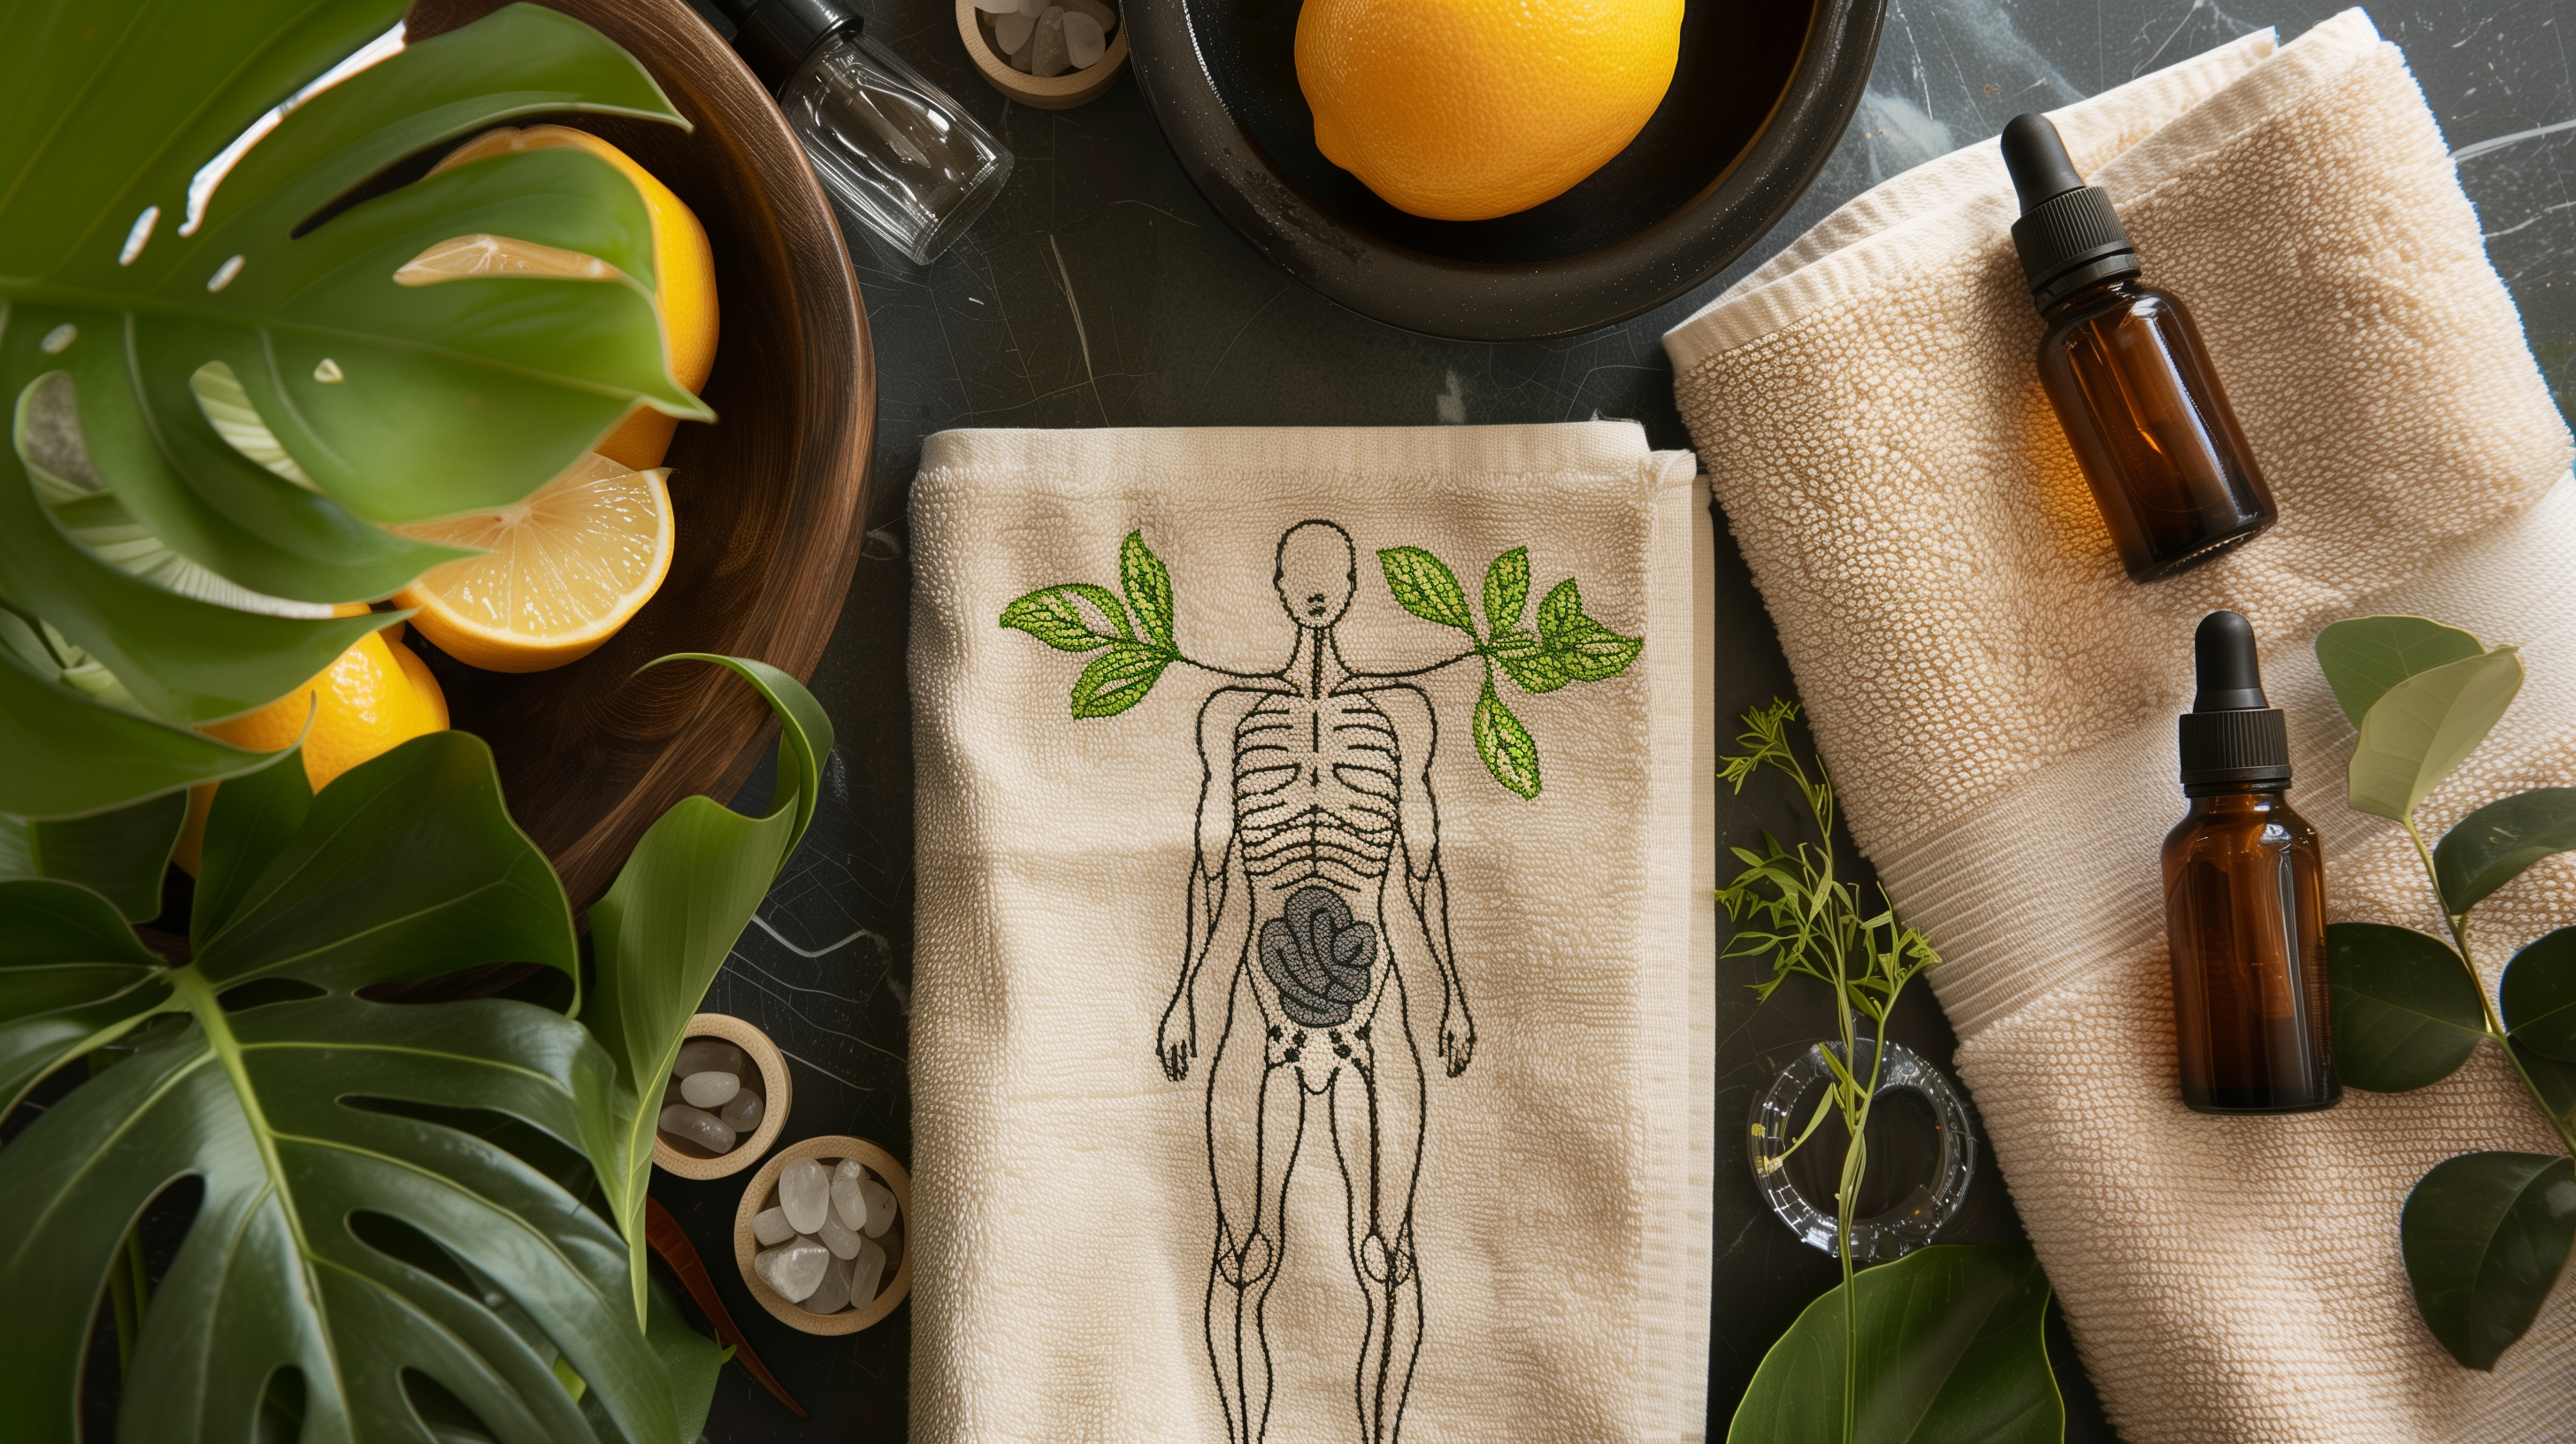 home spa setting with essential oils, a soft towel, and a diagram of lymph nodes on a body silhouette, surrounded by plants symbolizing growth and a bowl of citrus fruits for vitality.